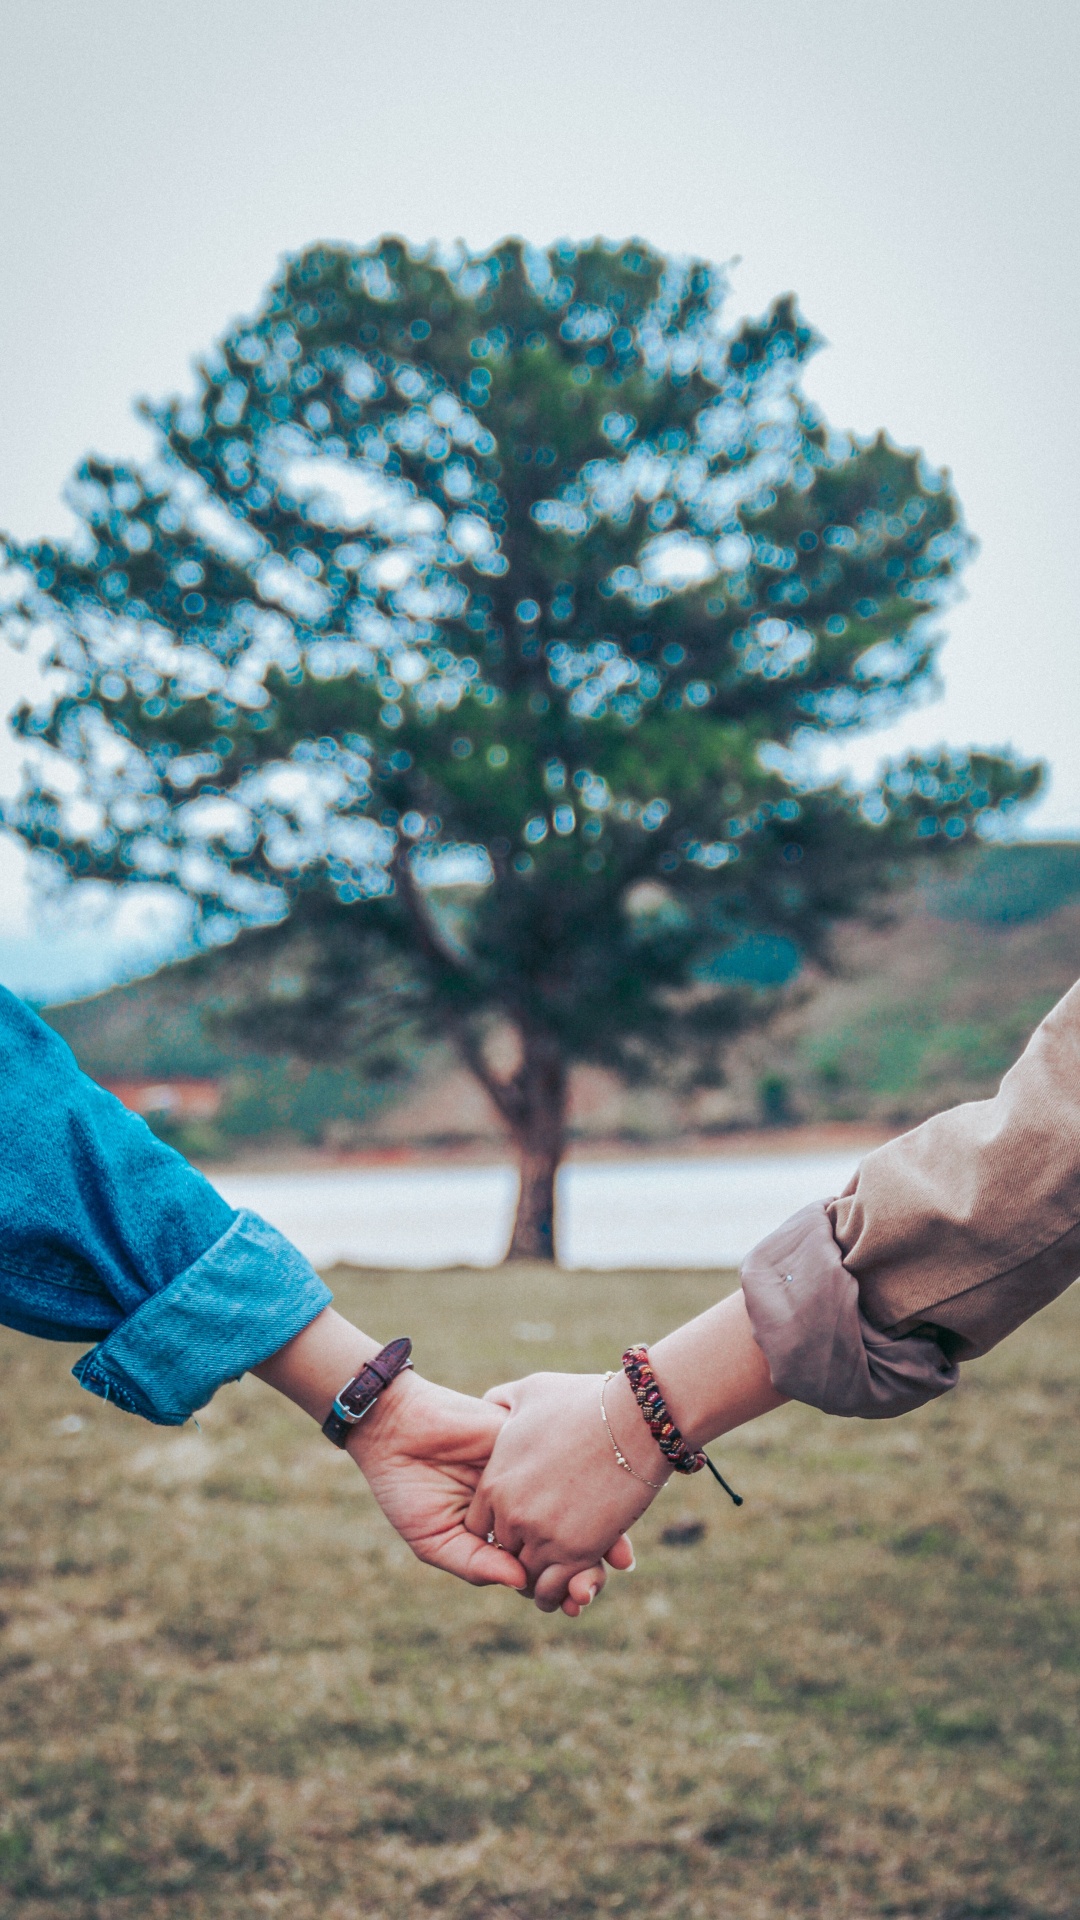 Friendship, Turquoise, Hand, Tree, Arm. Wallpaper in 1080x1920 Resolution